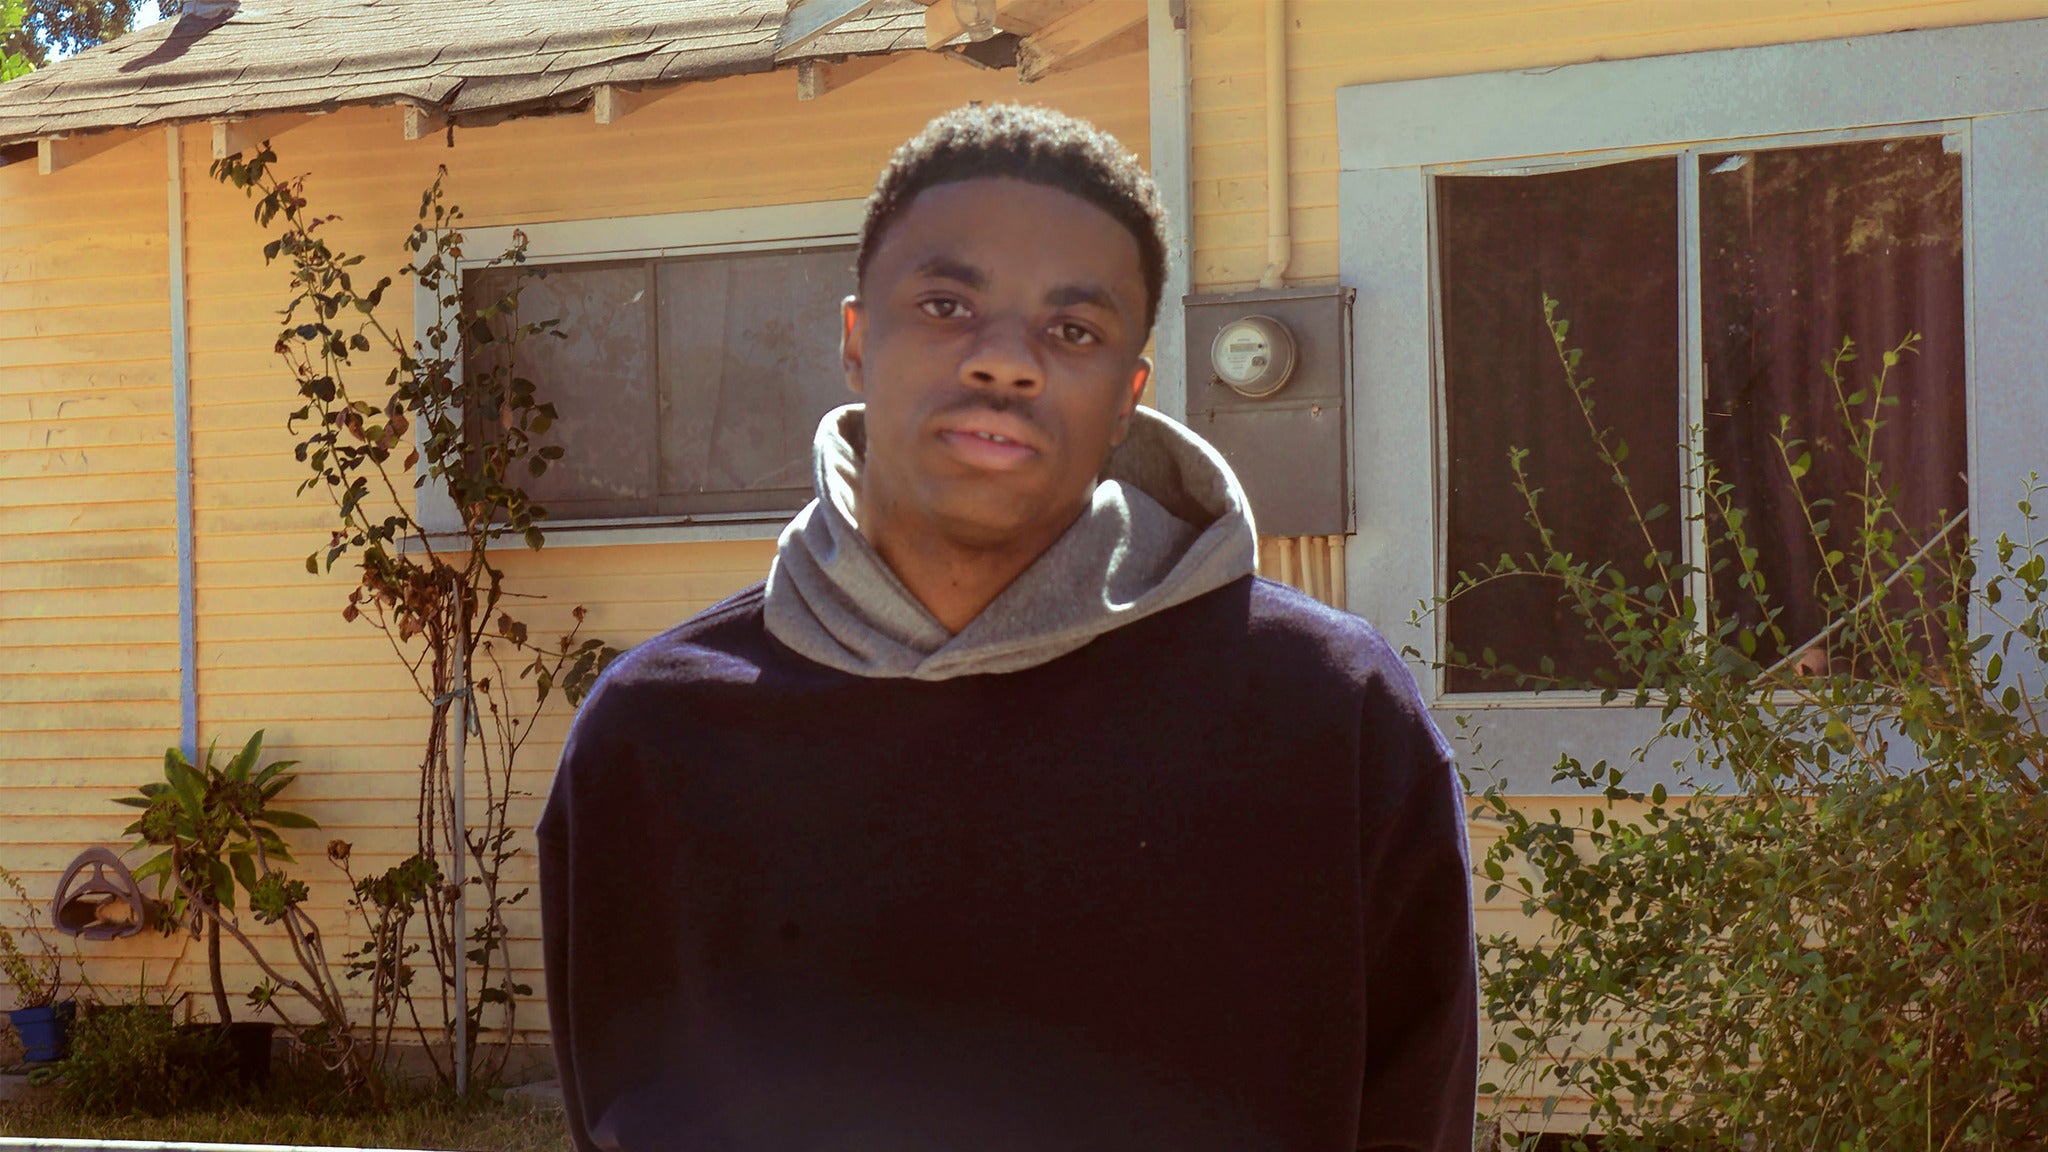 Vince Staples: Smile, You're On Camera in San Antonio promo photo for Live Nation presale offer code